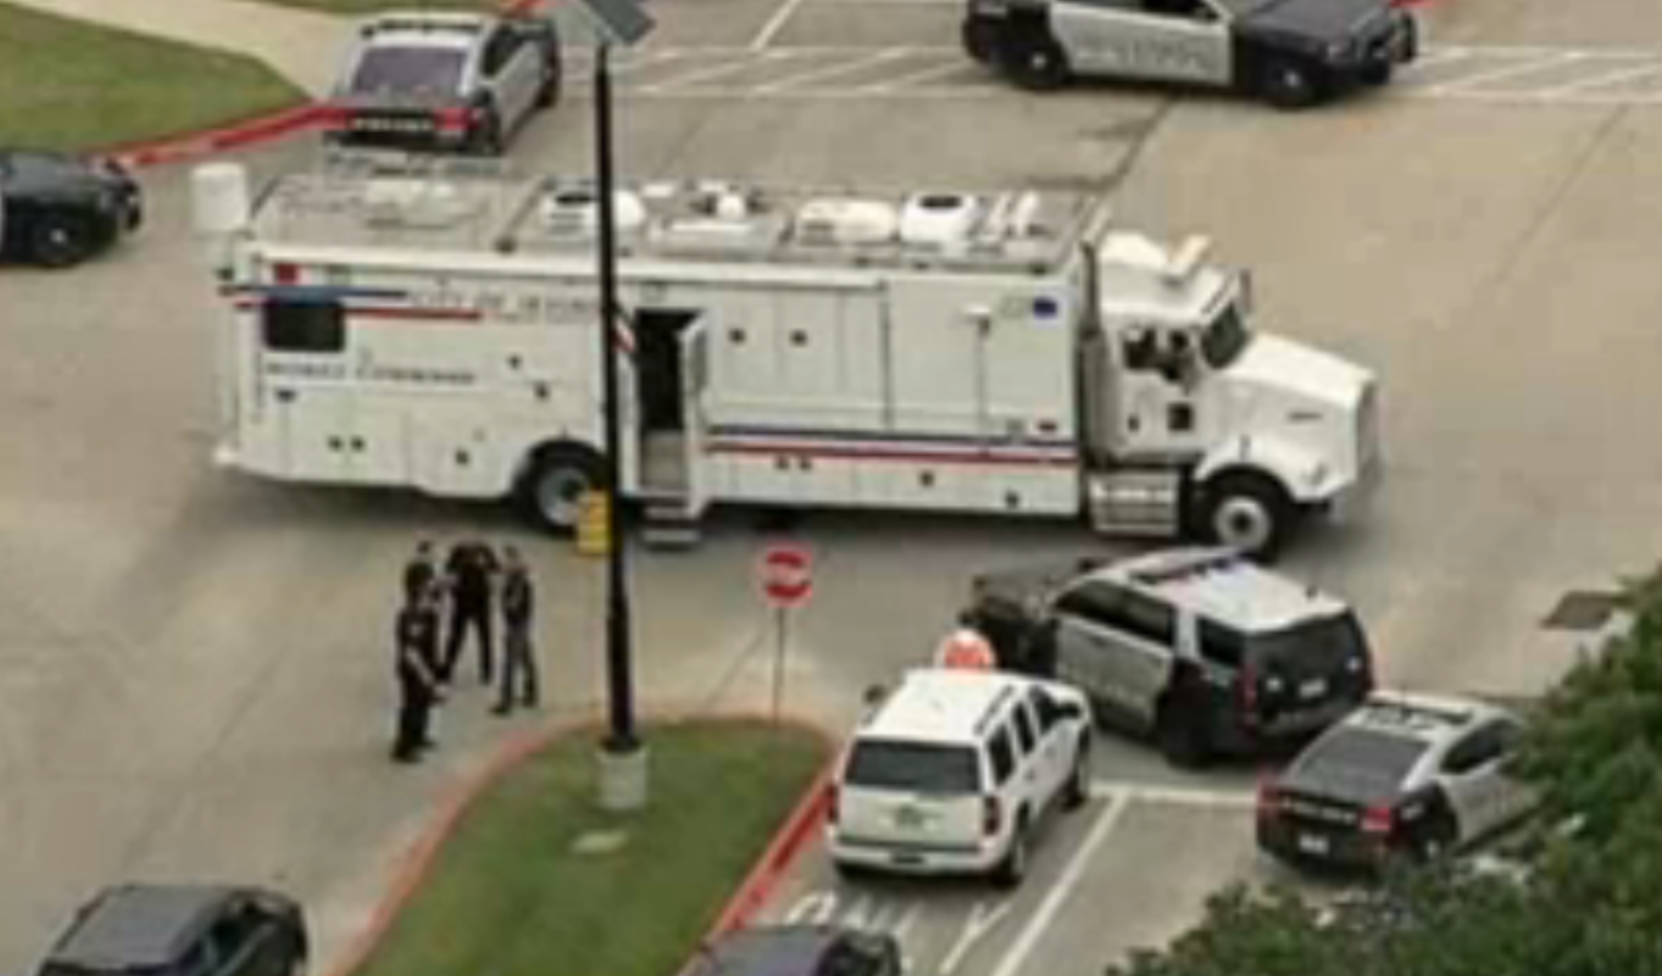 A shooter has been reported at North Lake College in Irving, Texas